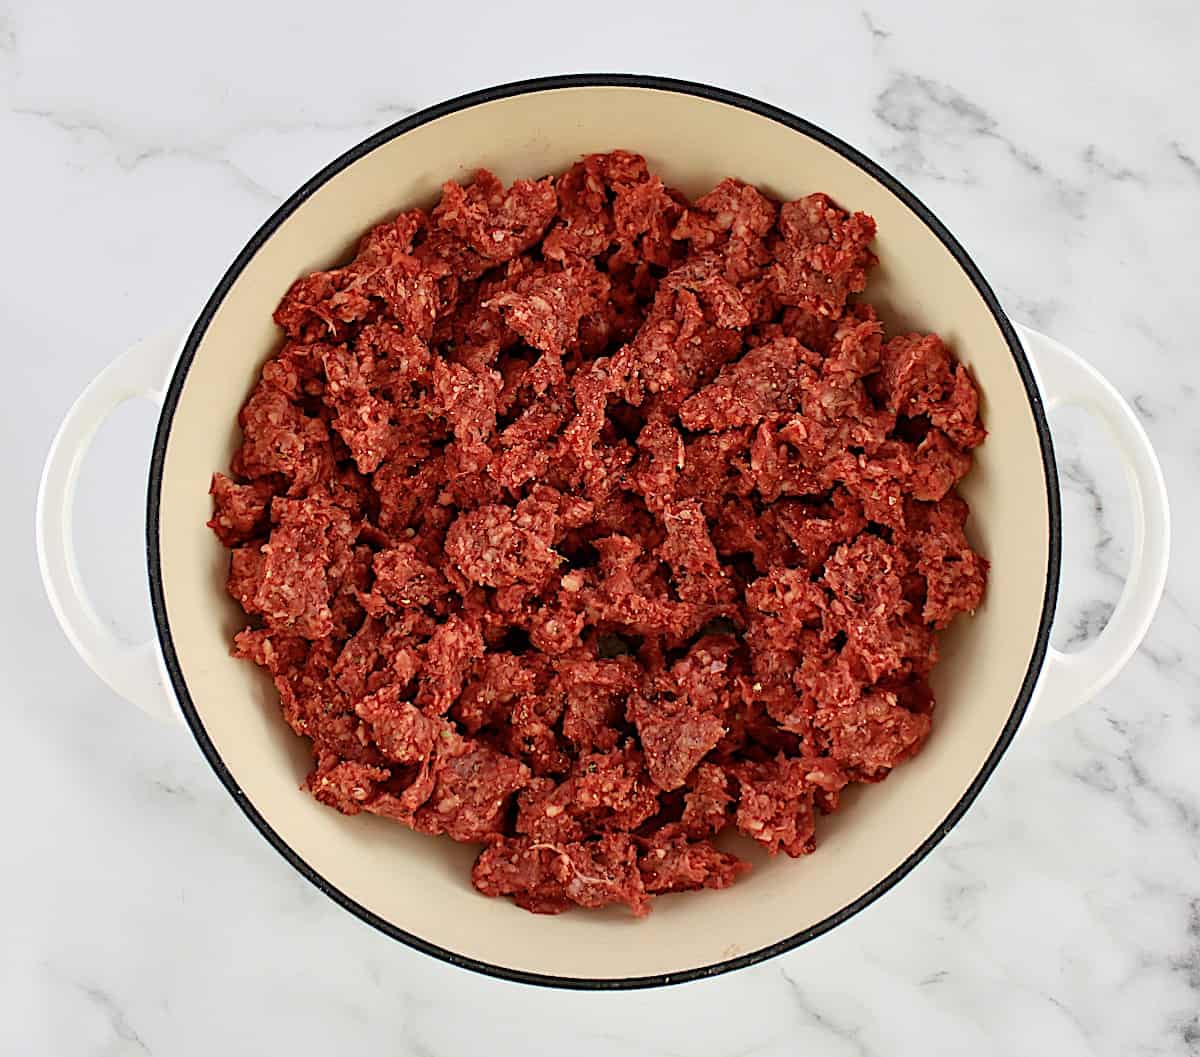 raw ground beef in skillet